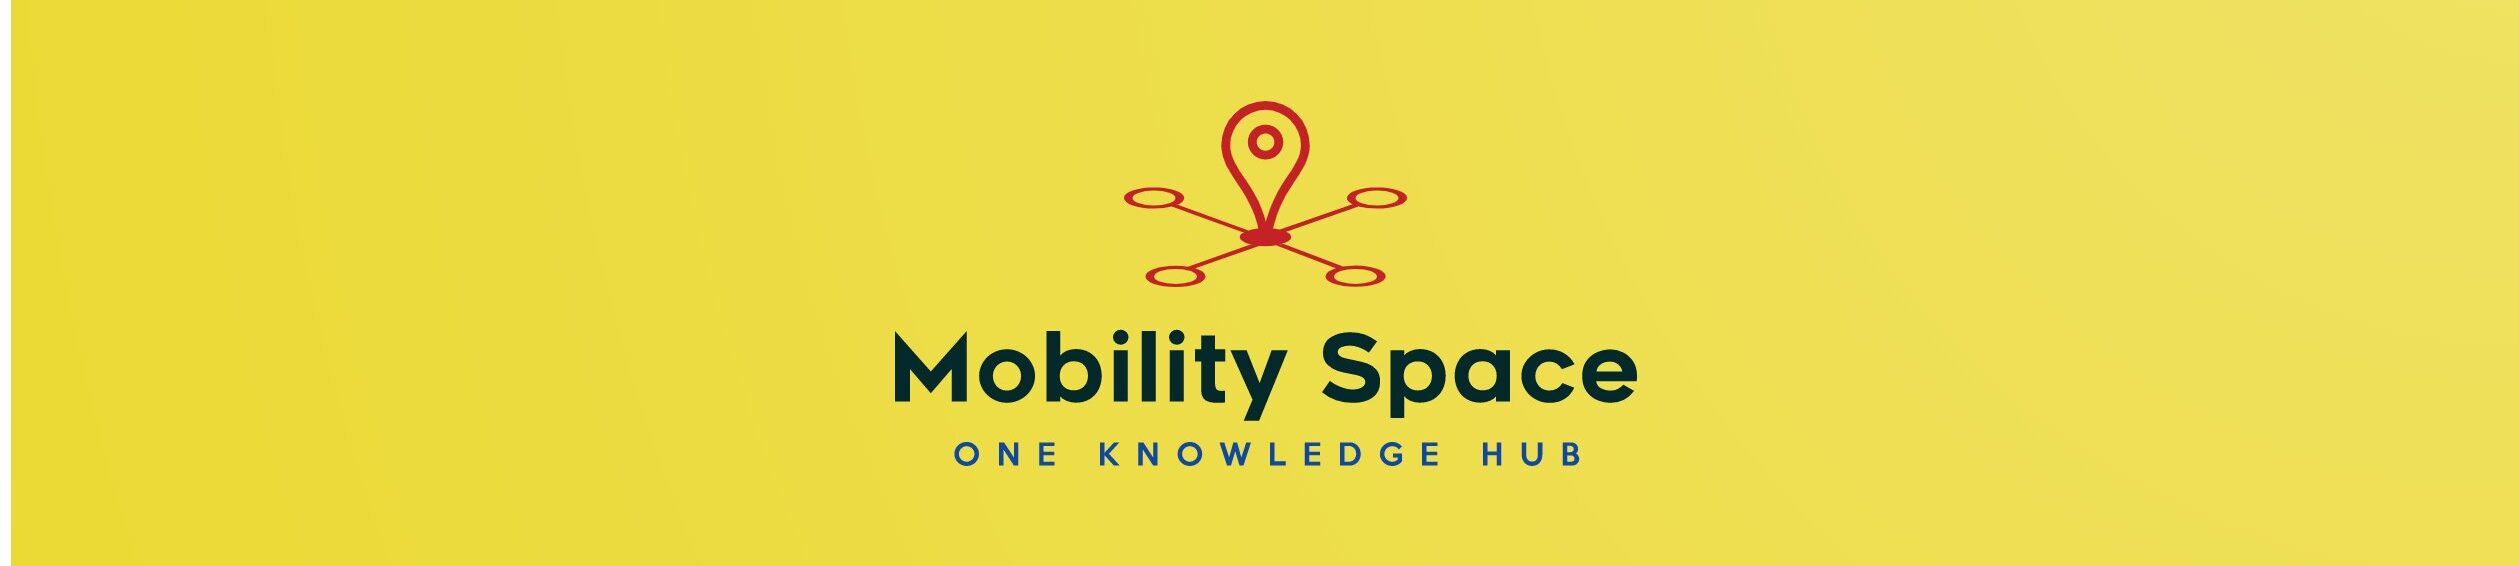 Mobility Space